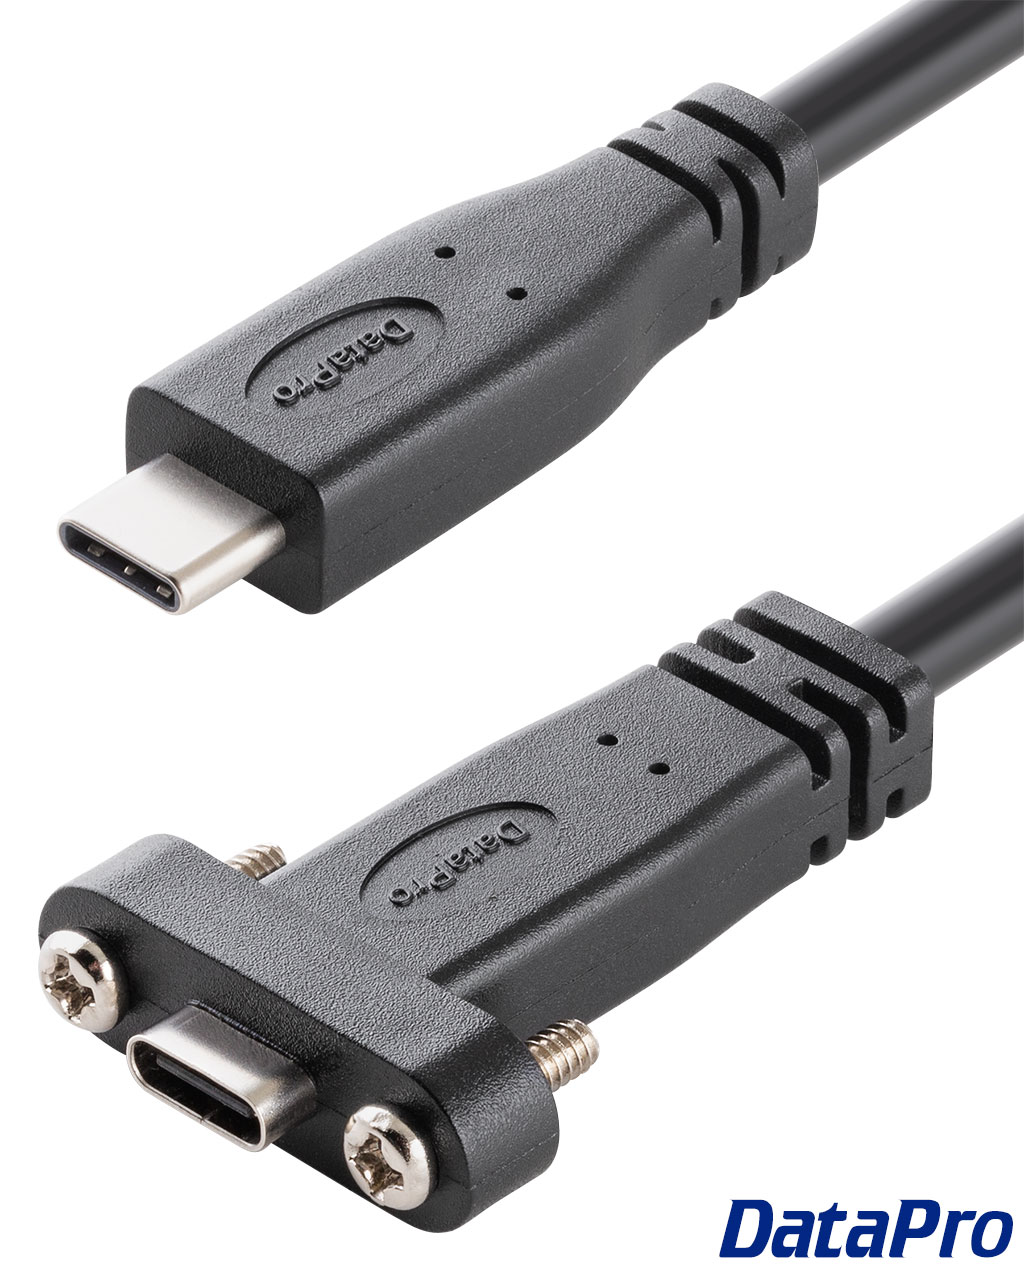 Panel Mount USB4 Thunderbolt Extension Cable F-M -- DataPro